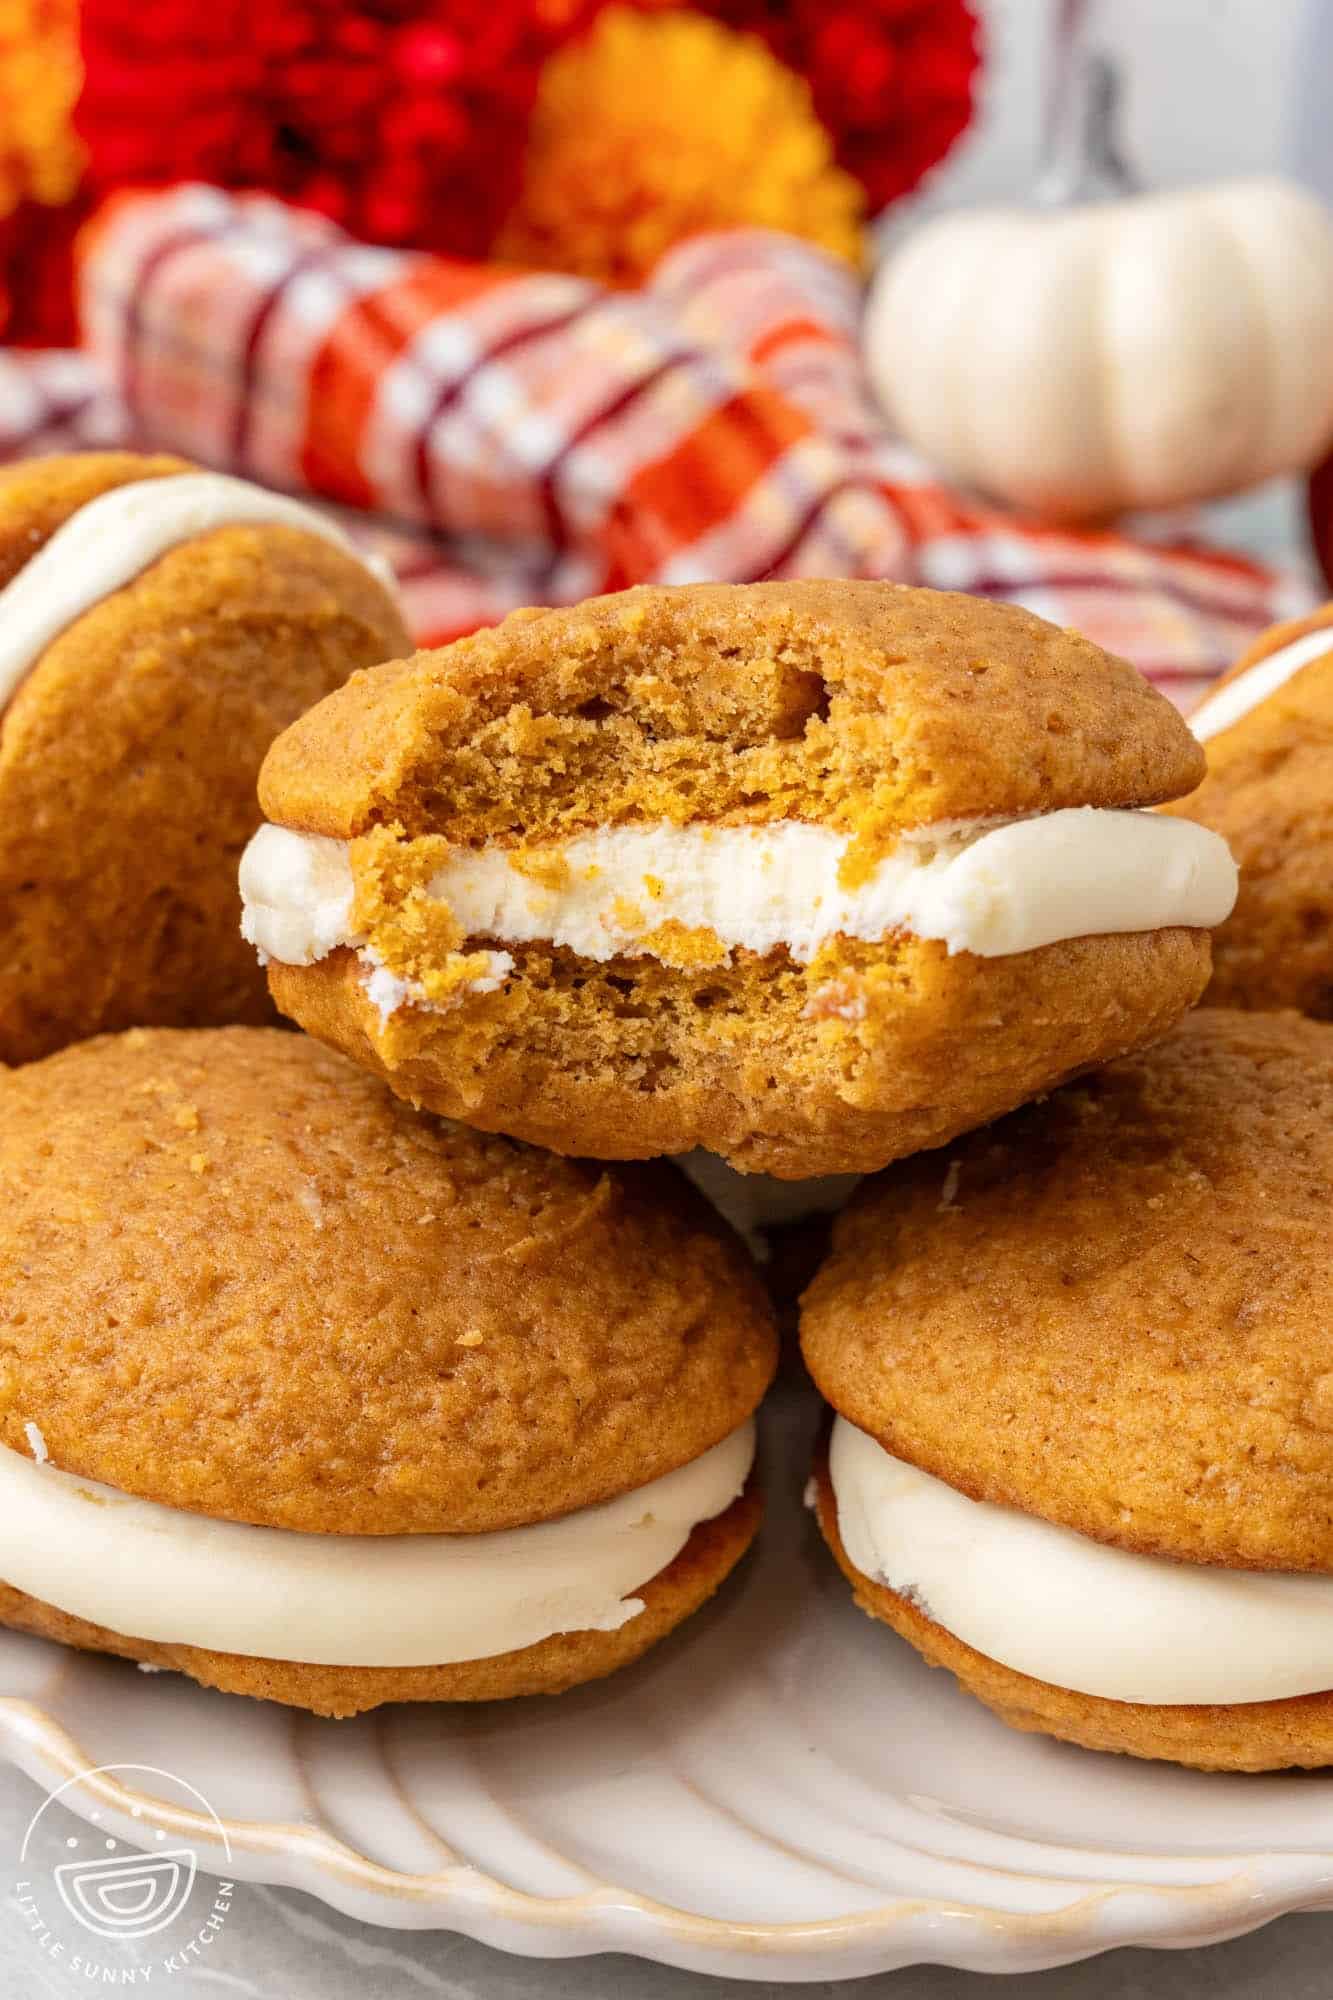 pumpkin whoopie pies on a plate. One has been bitten into to show fluffy interior texture.